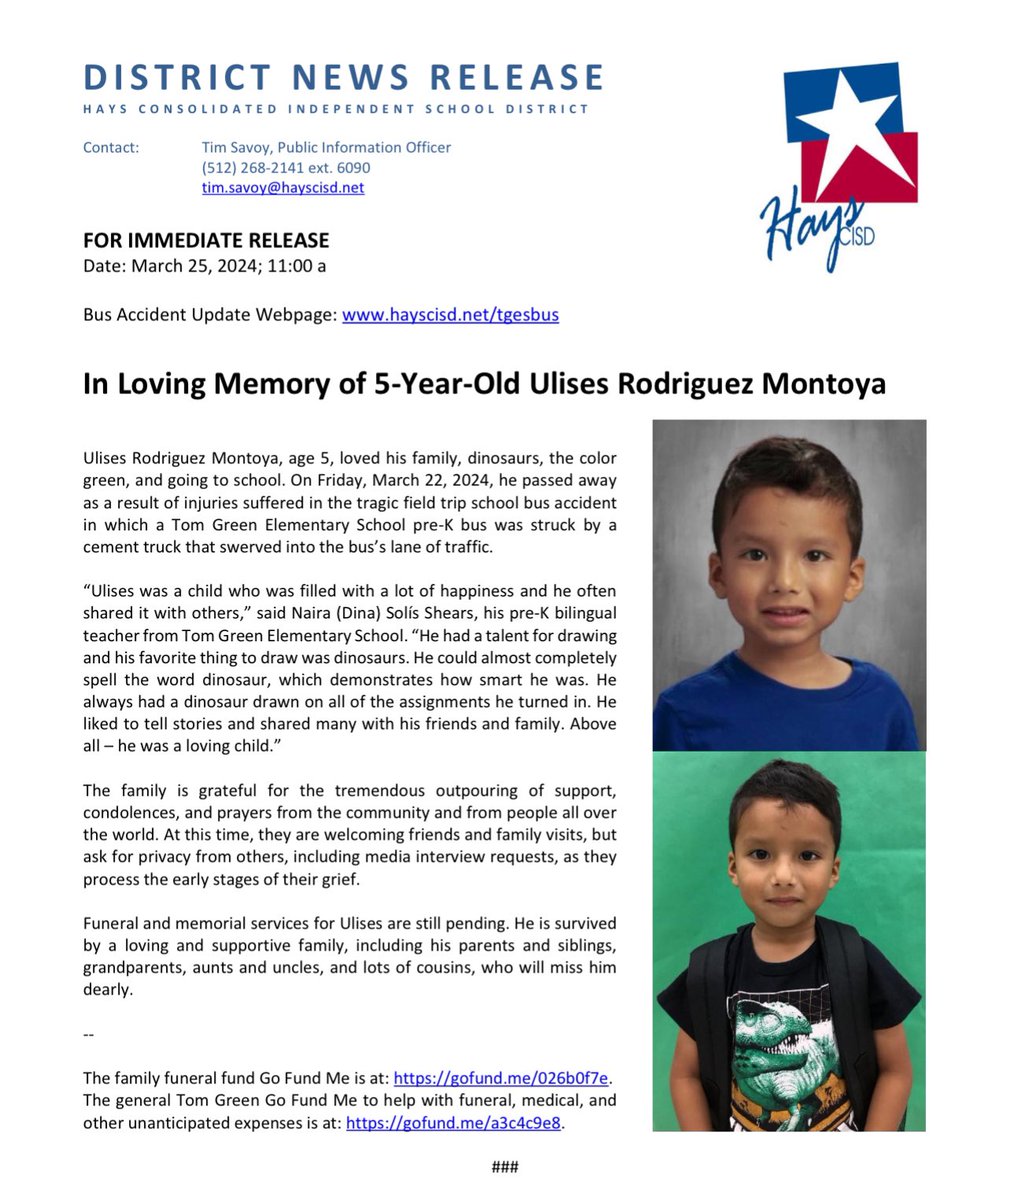 Truly heartbreaking. Ulises Rodriguez Montoya, 5, has been identified as the child killed when a Hays County bus crashed Friday. “Ulises was a child who was filled with a lot of happiness and he often shared it with others,” his teacher said.